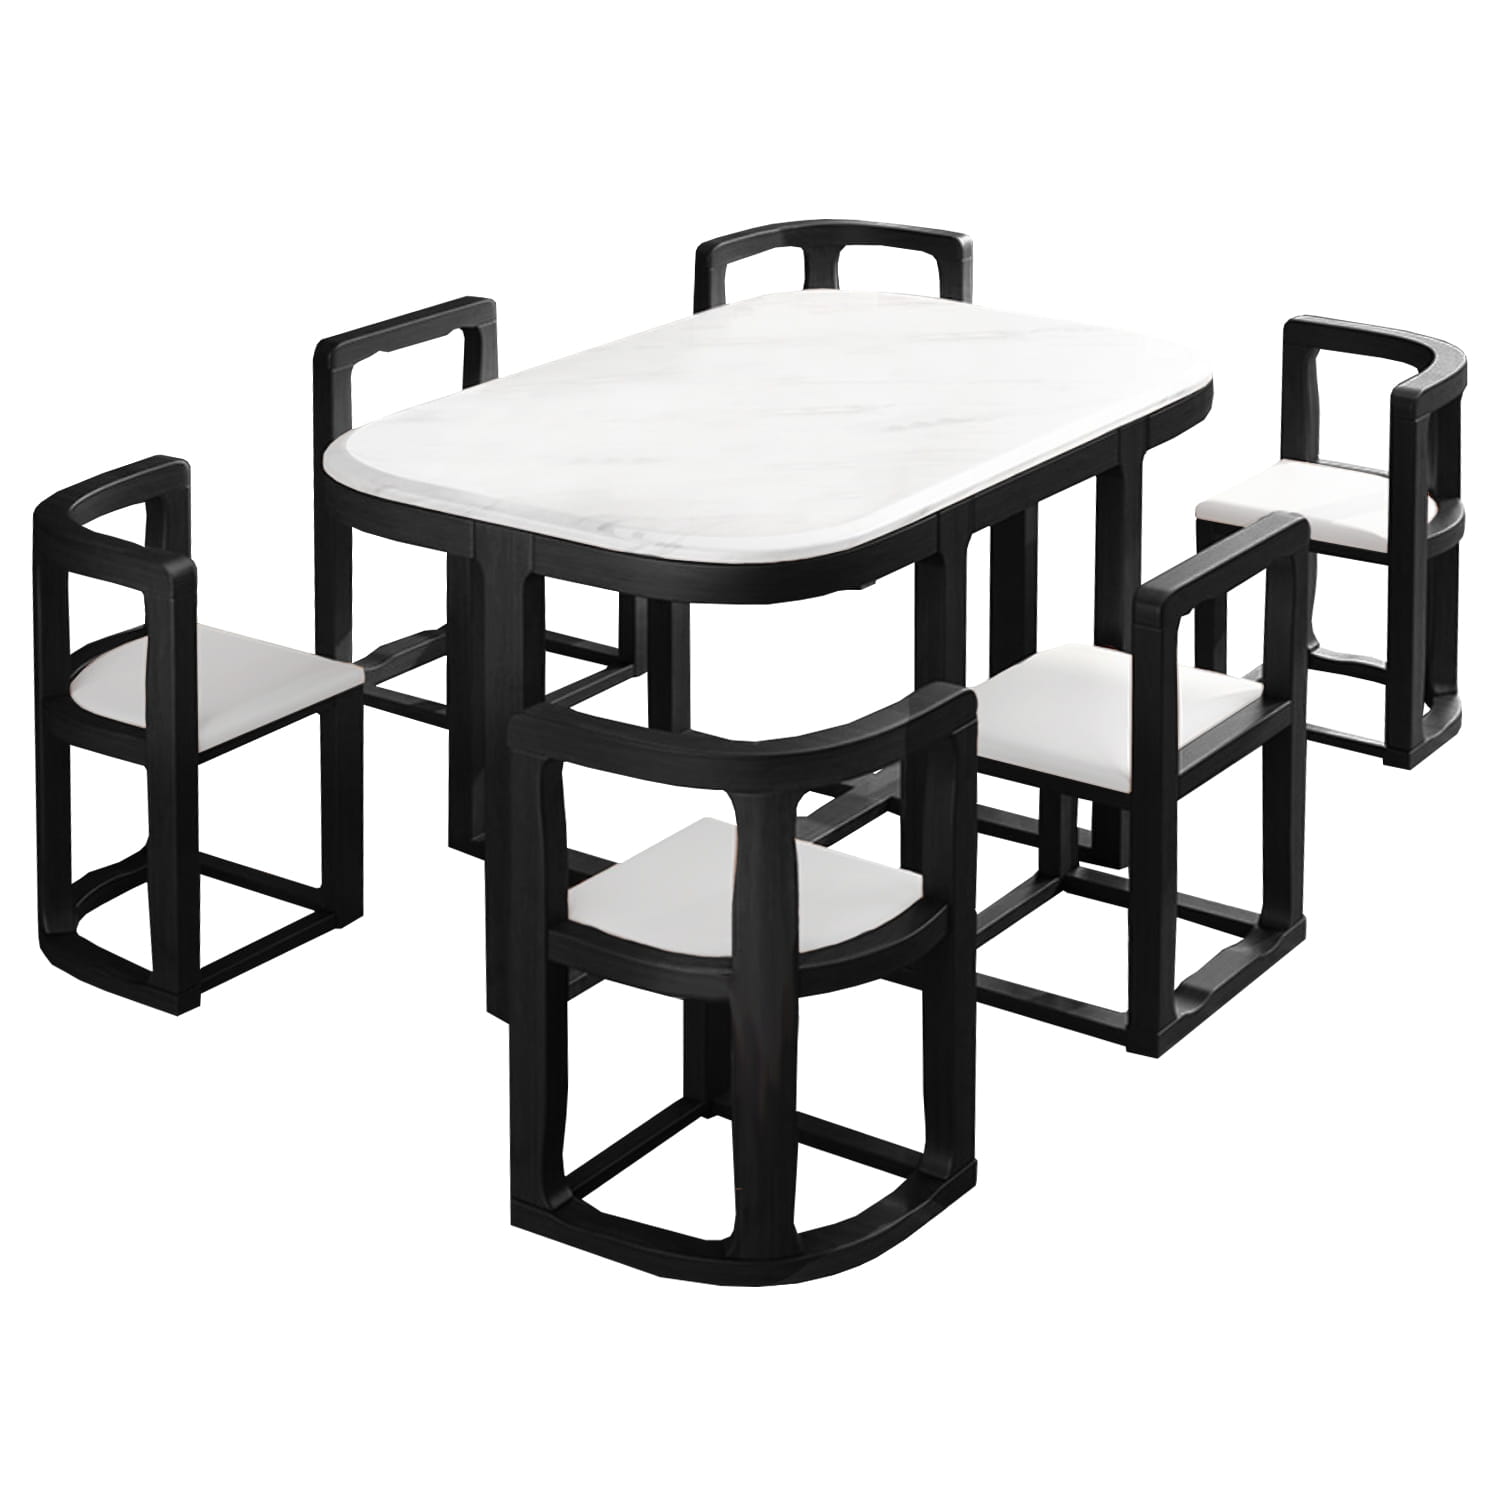 Grains 6-Seater Dining Set (Black) - Furniture Source Philippines